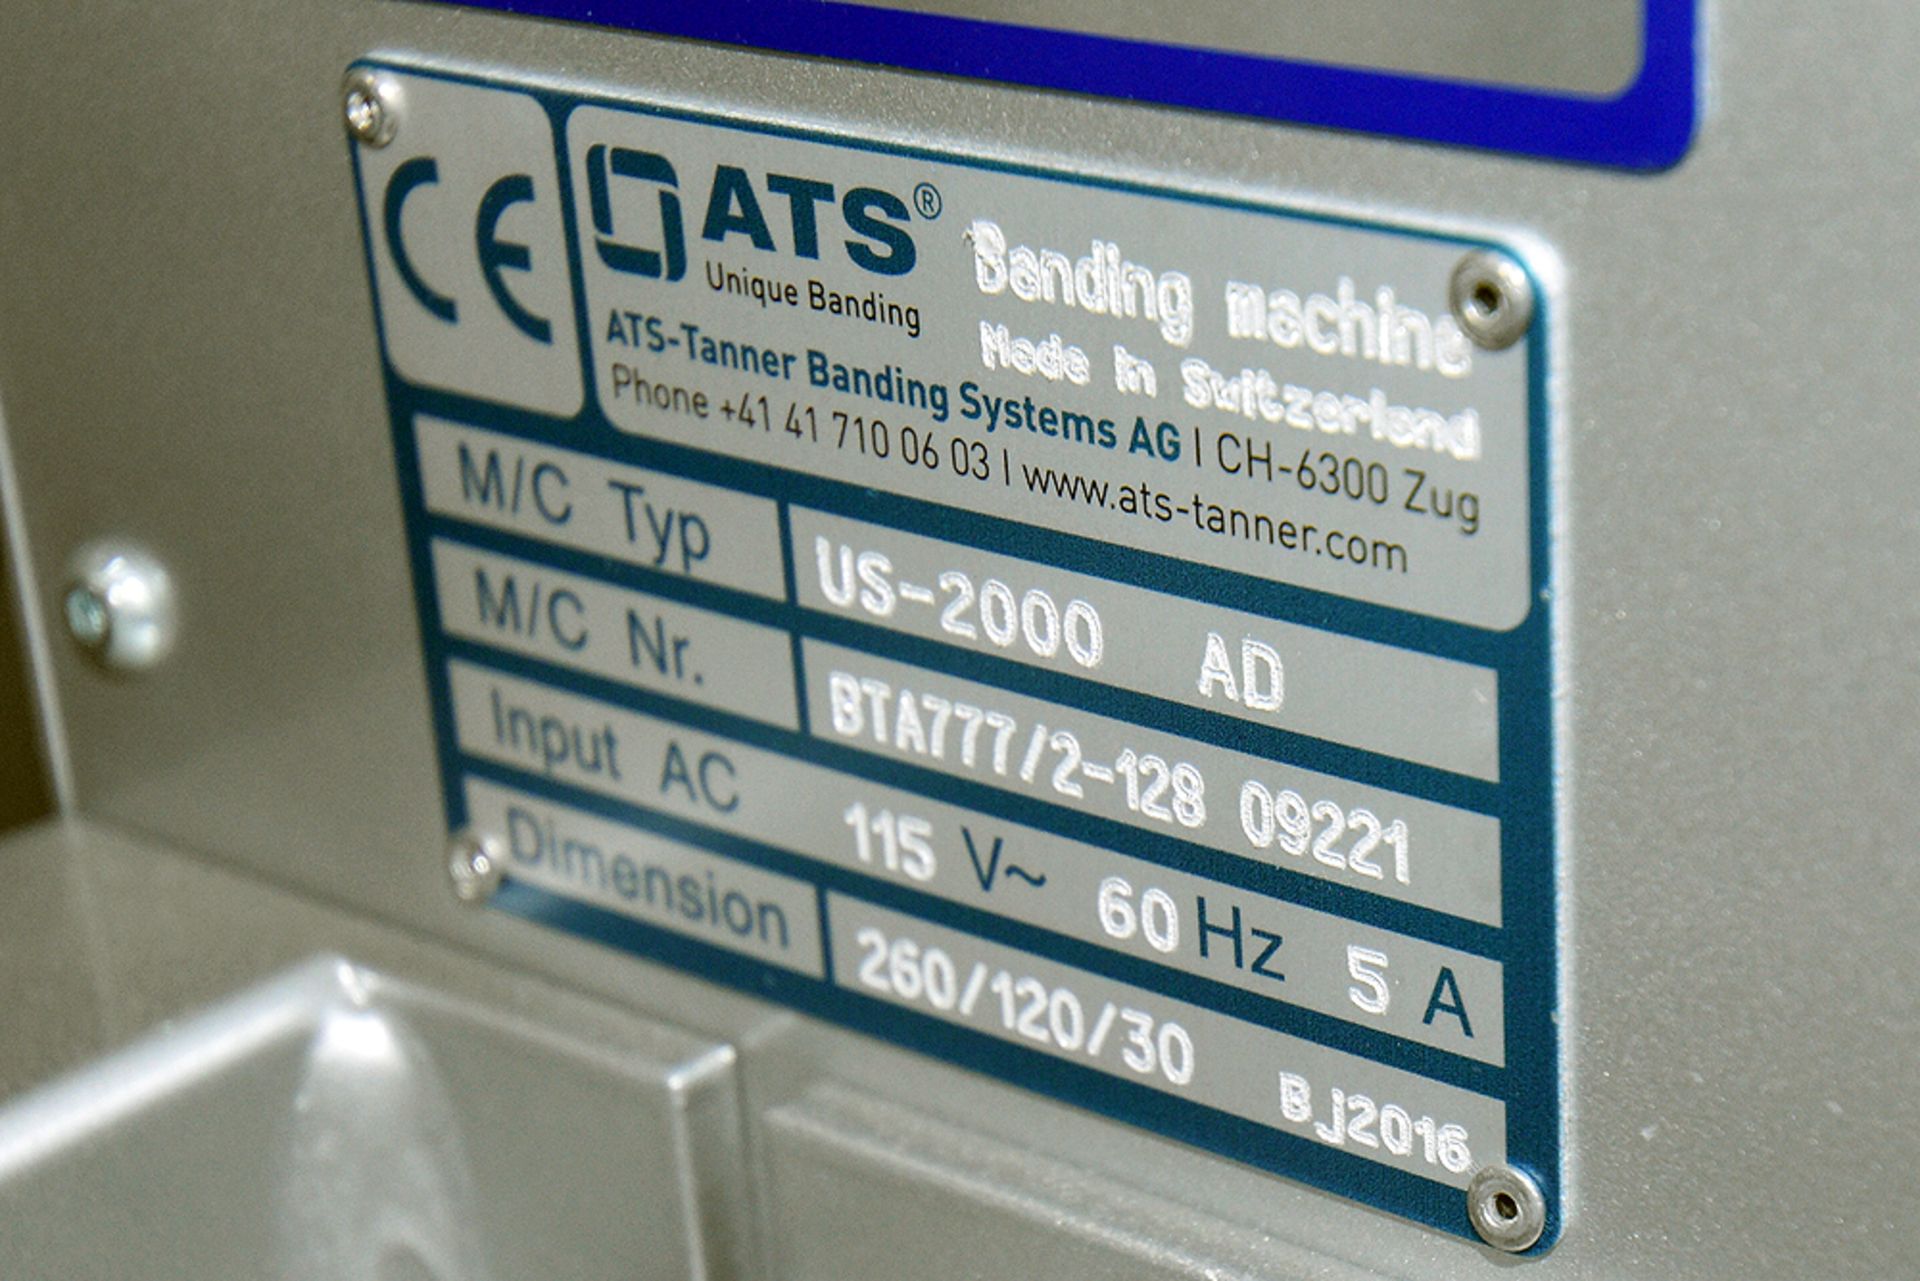 ATS US-2000 SCB-PH Horizontal and Vertical Stacking, Automatic, Banding System - Image 11 of 17